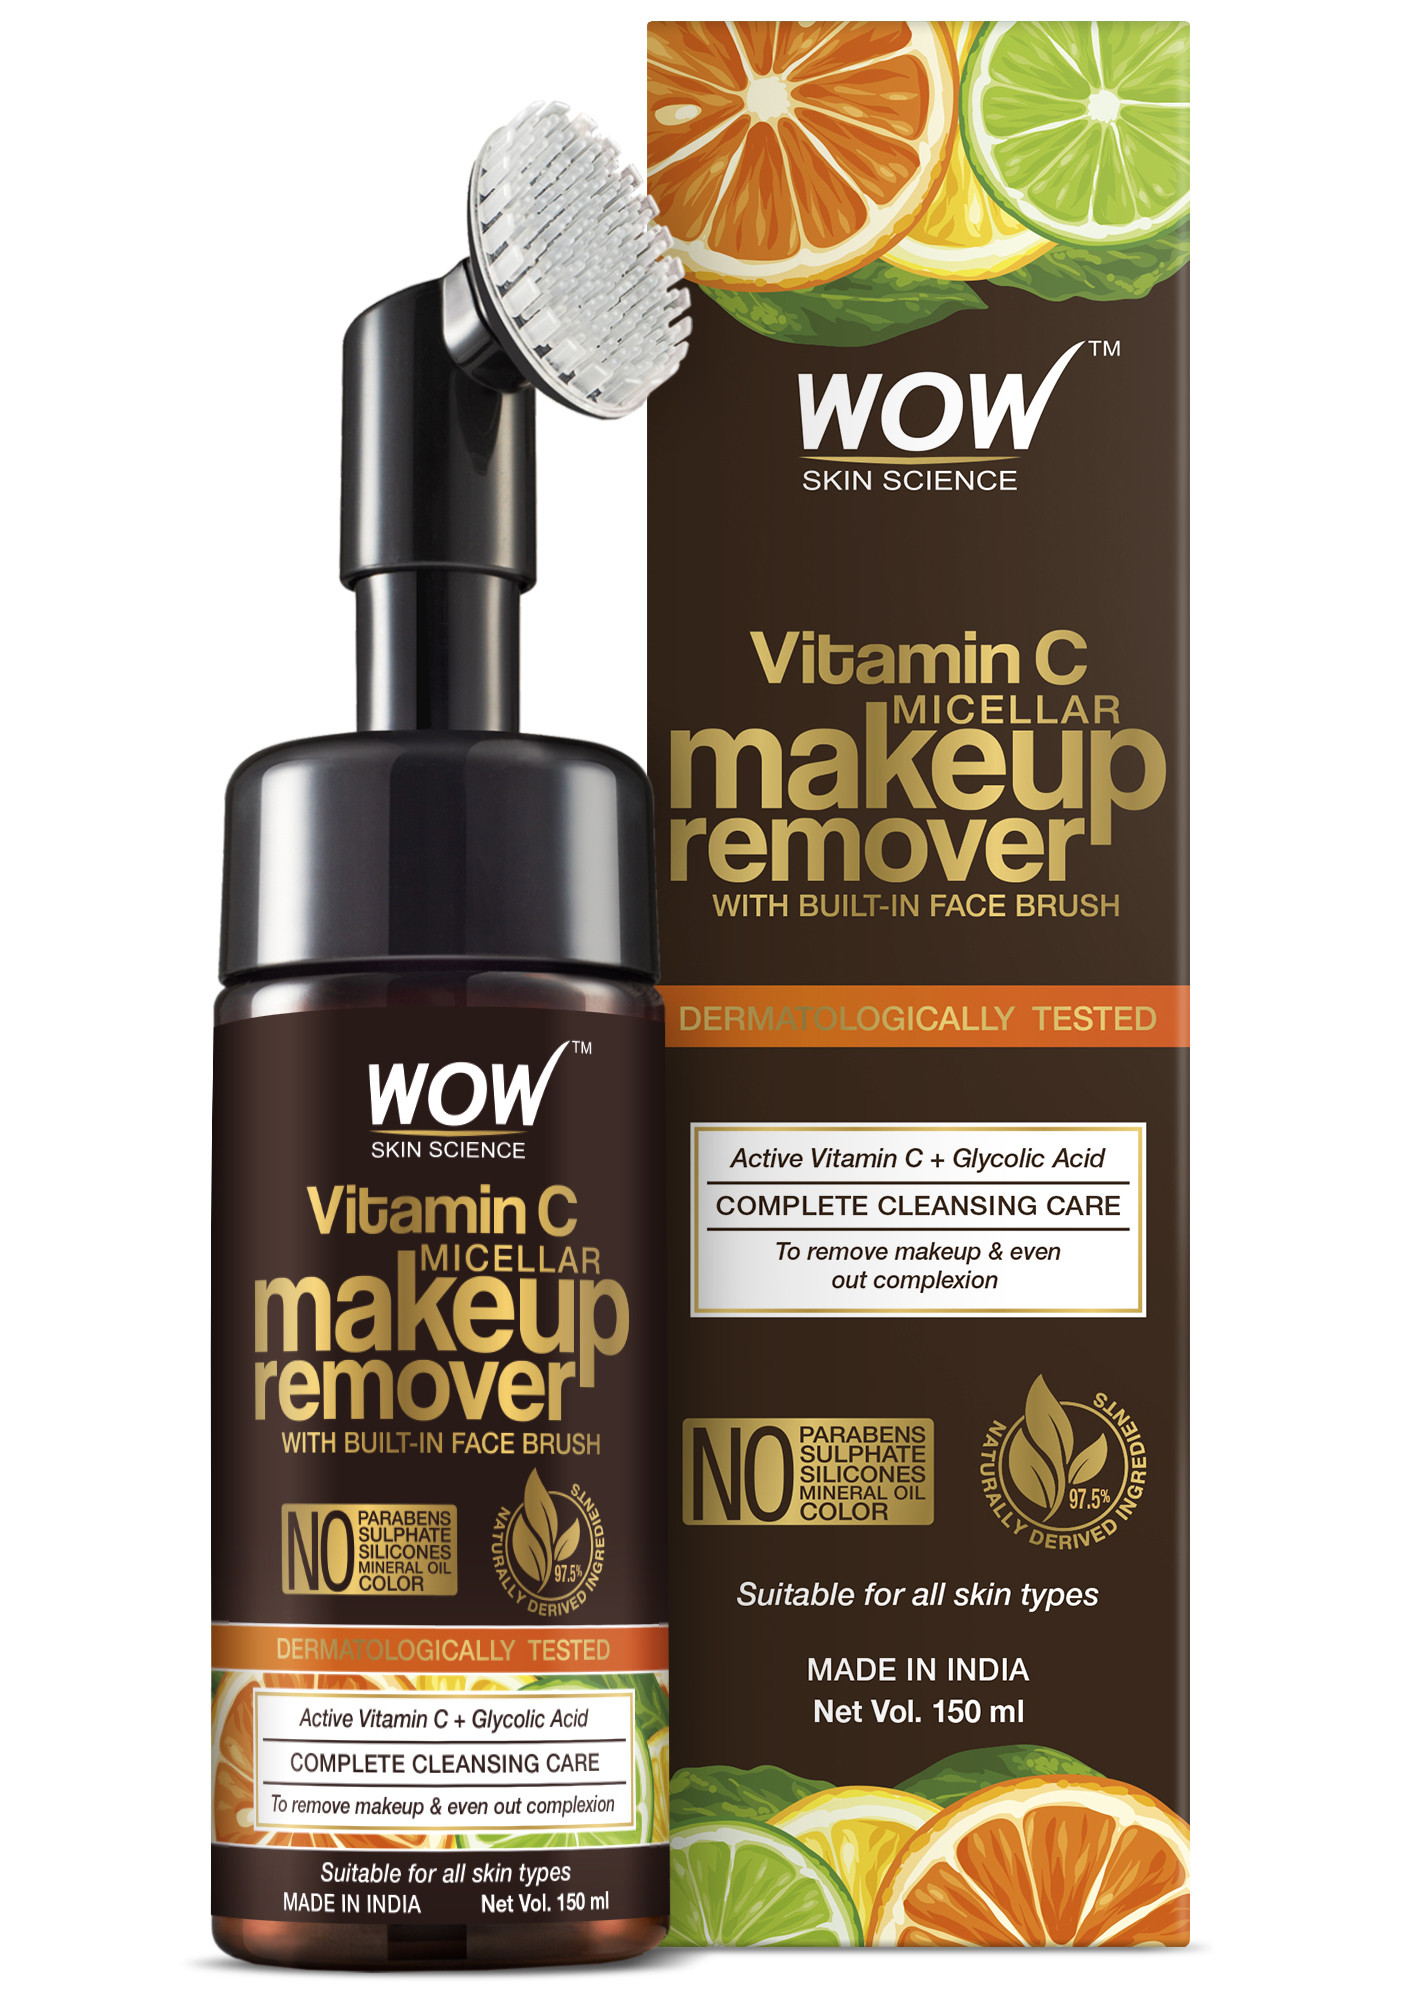 WOW Skin Science Vitamin C Makeup Remover With Built-In Face Brush (MICELLAR) - No Parabens, Sulphate, Silicones, Mineral Oil, Color - 150mL